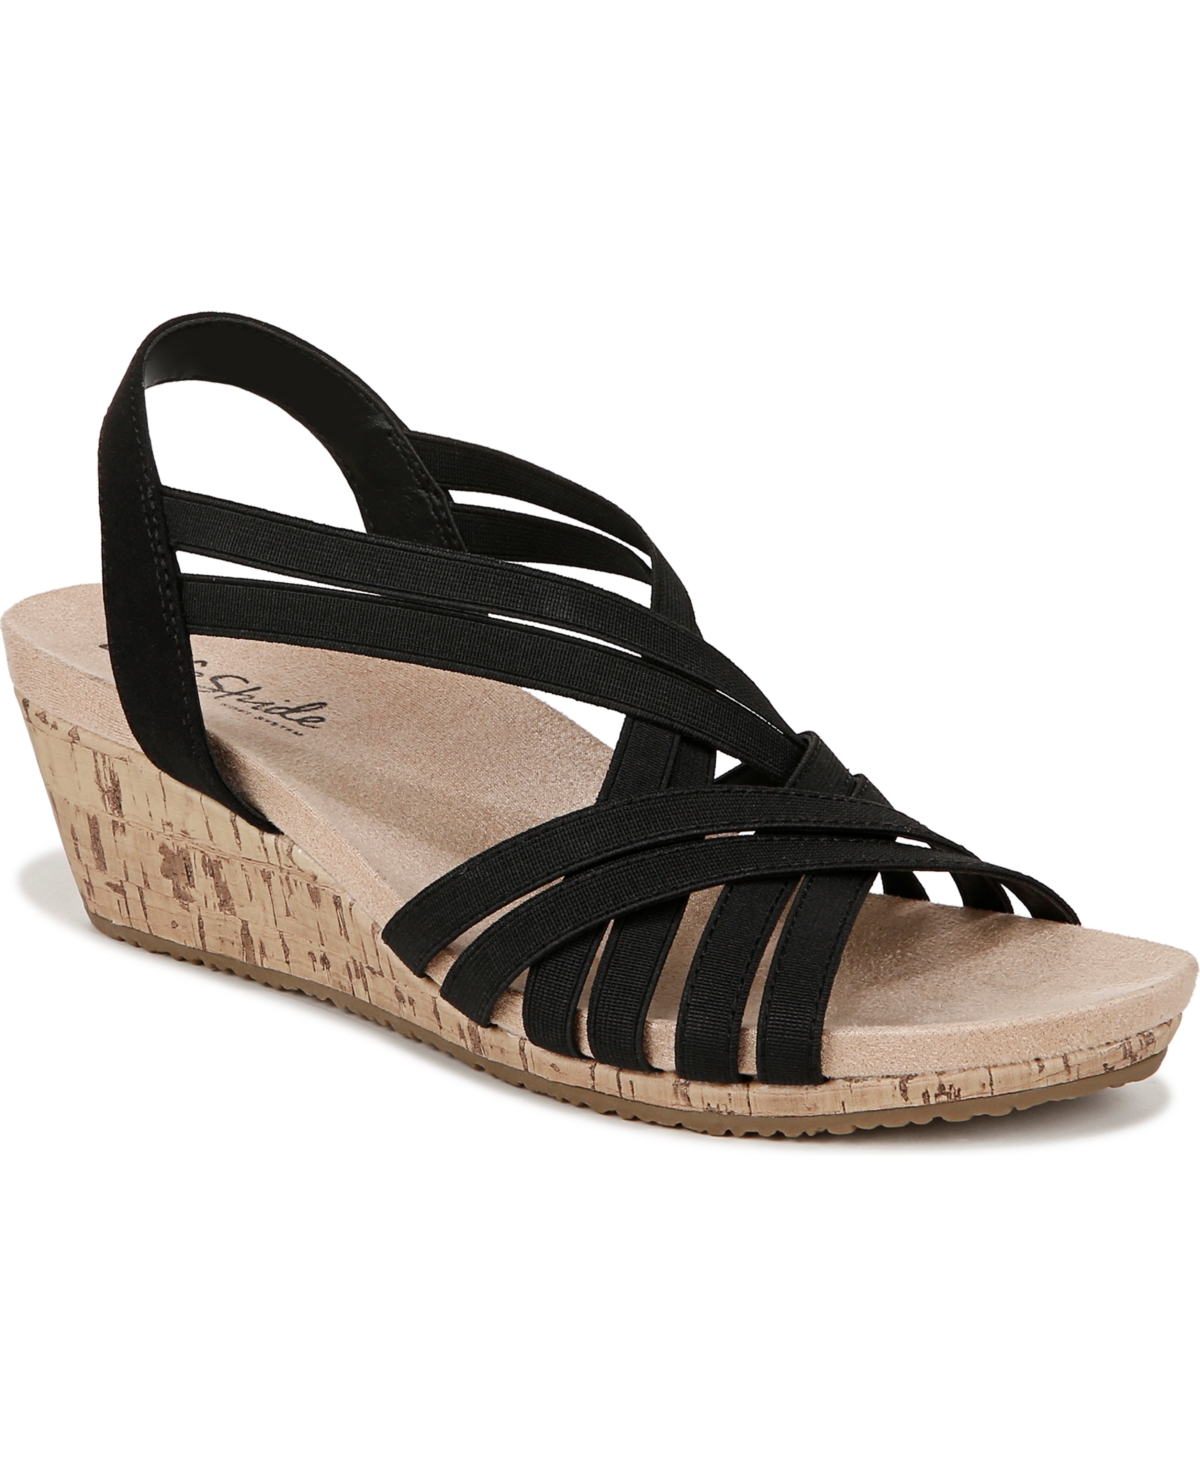 Mallory Strappy Wedge Sandals - Black Fabric